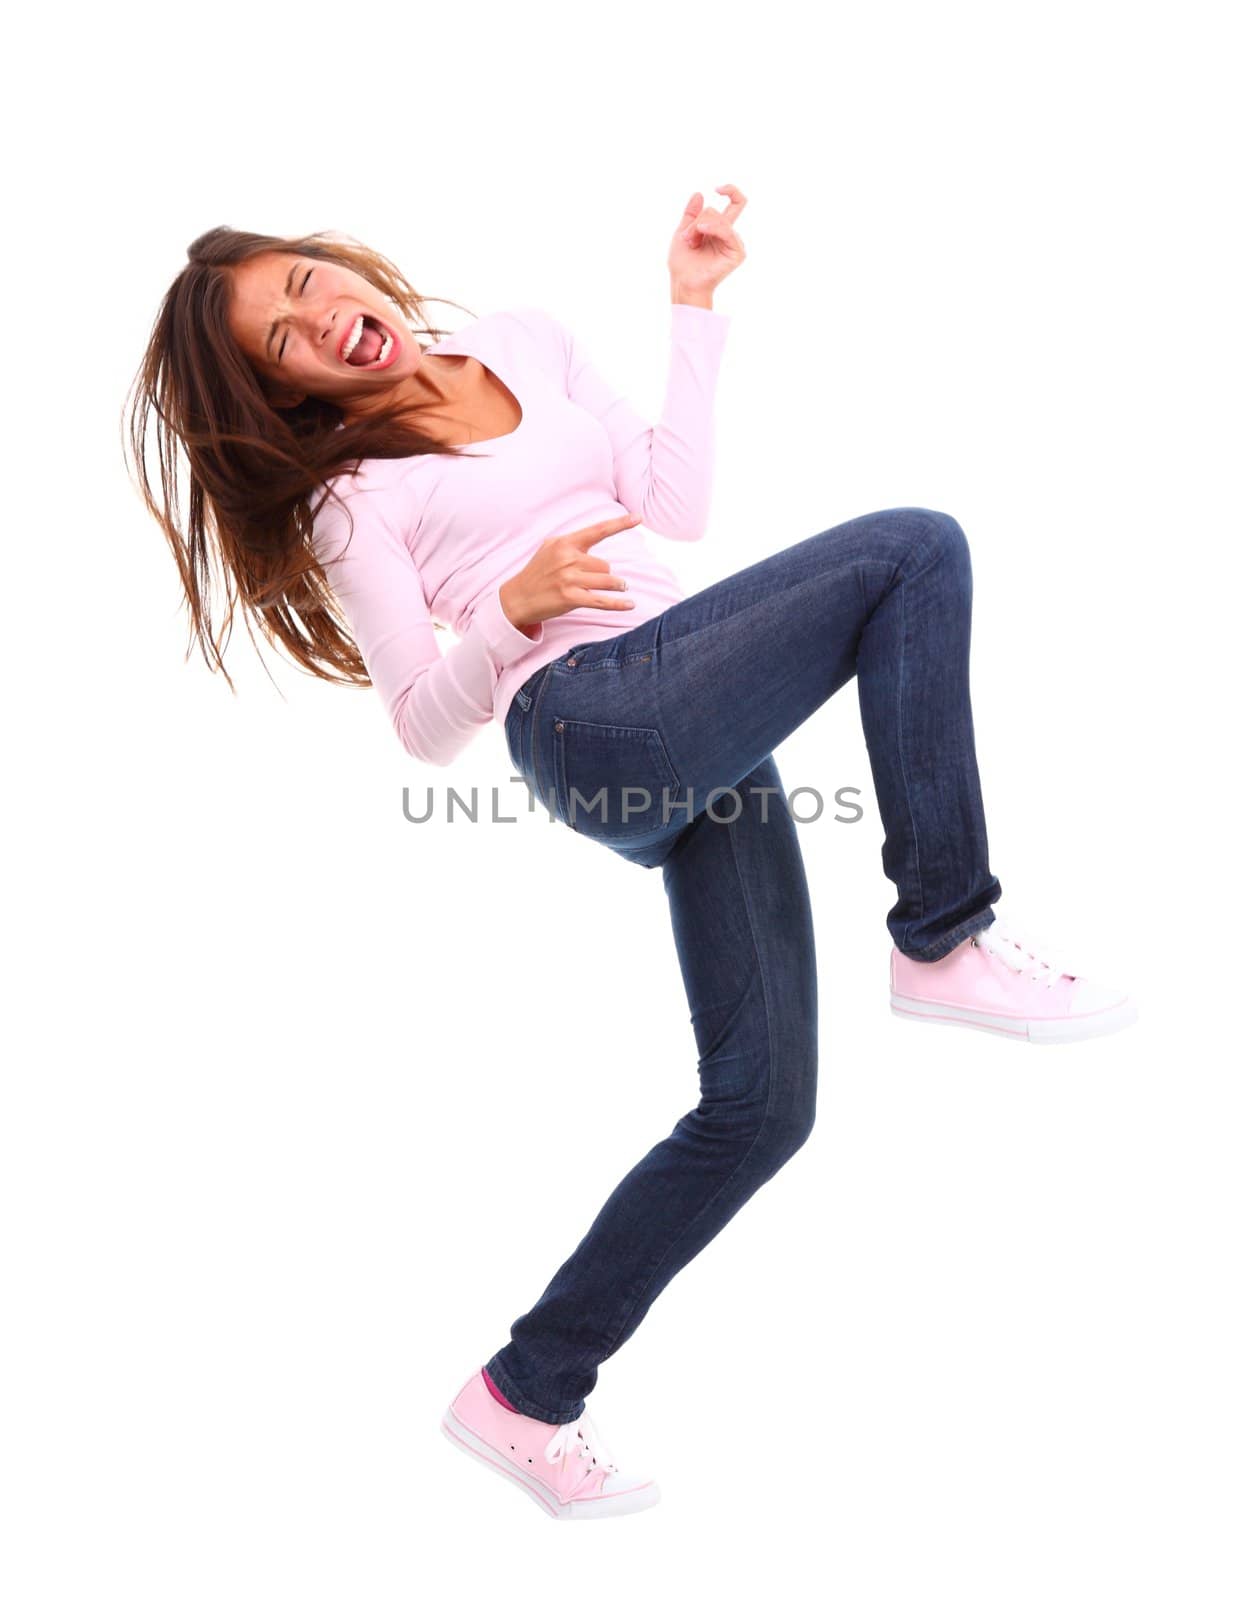 Asian woman intensely playing air guitar. Isolated on white background. Mixed race chinese / caucasian model.